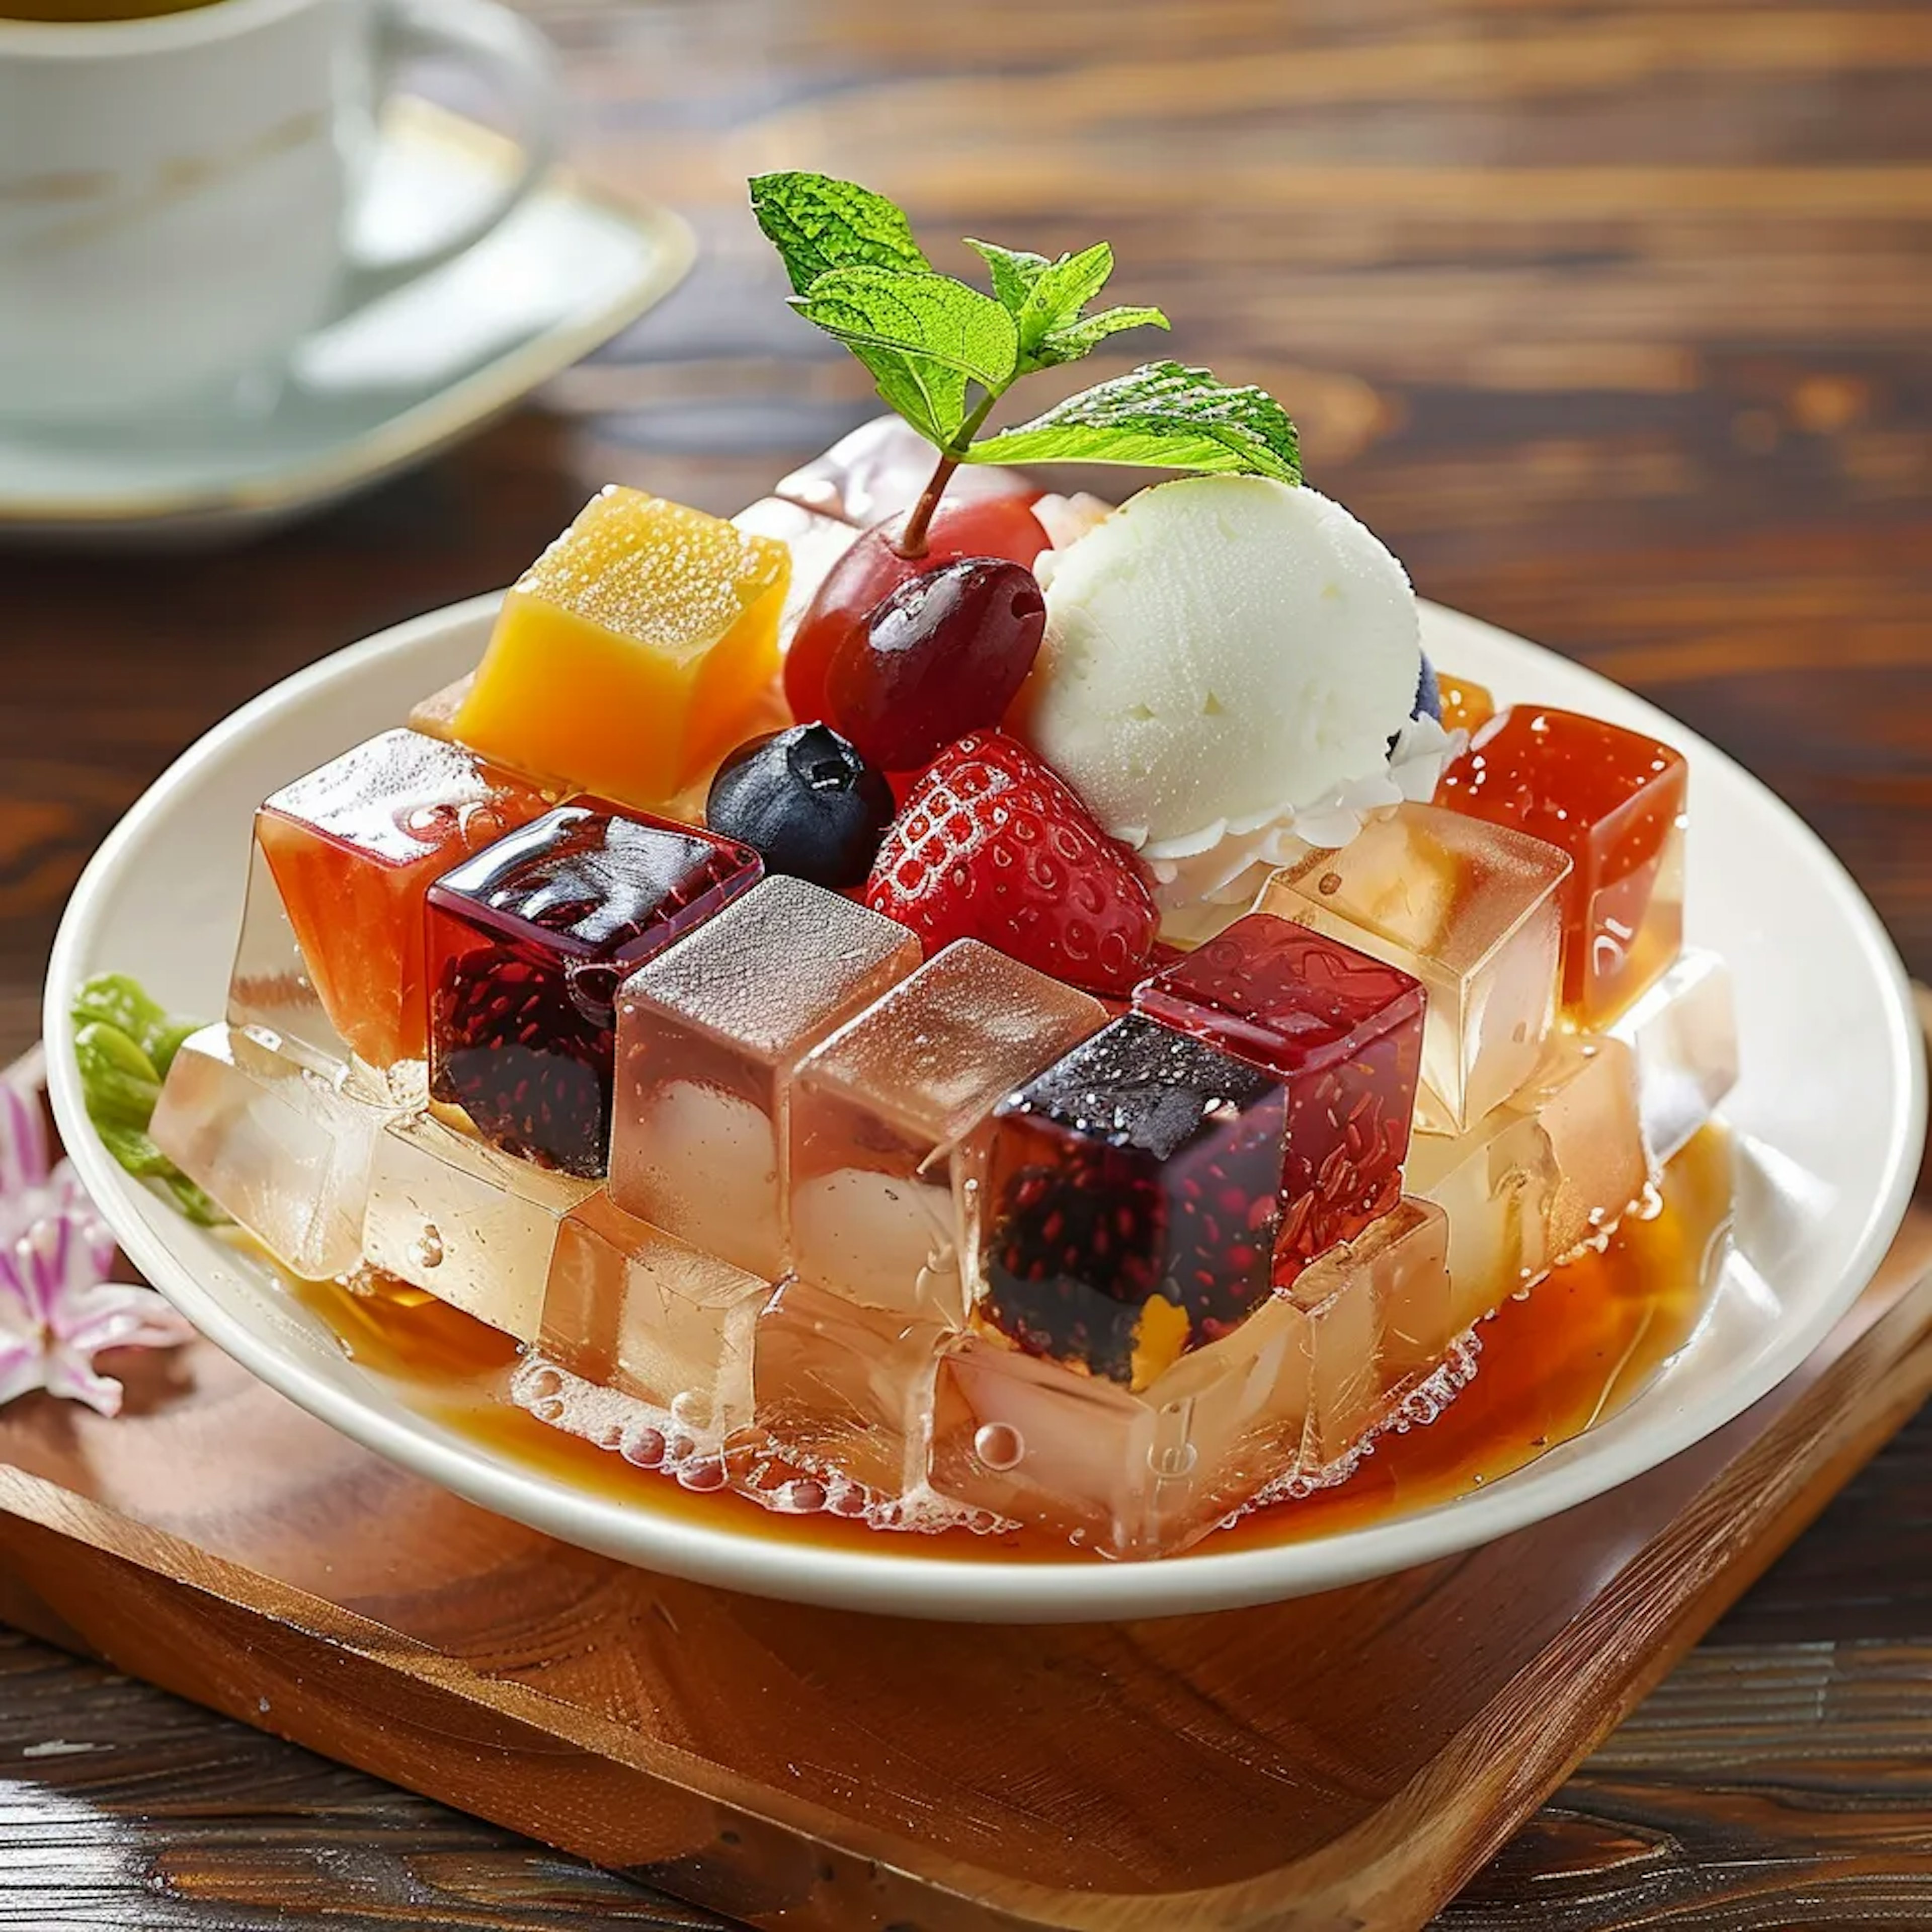 undefined-https://d3nrav7vo3lya8.cloudfront.net/profile_photos/japanese-sweets/86p.webp